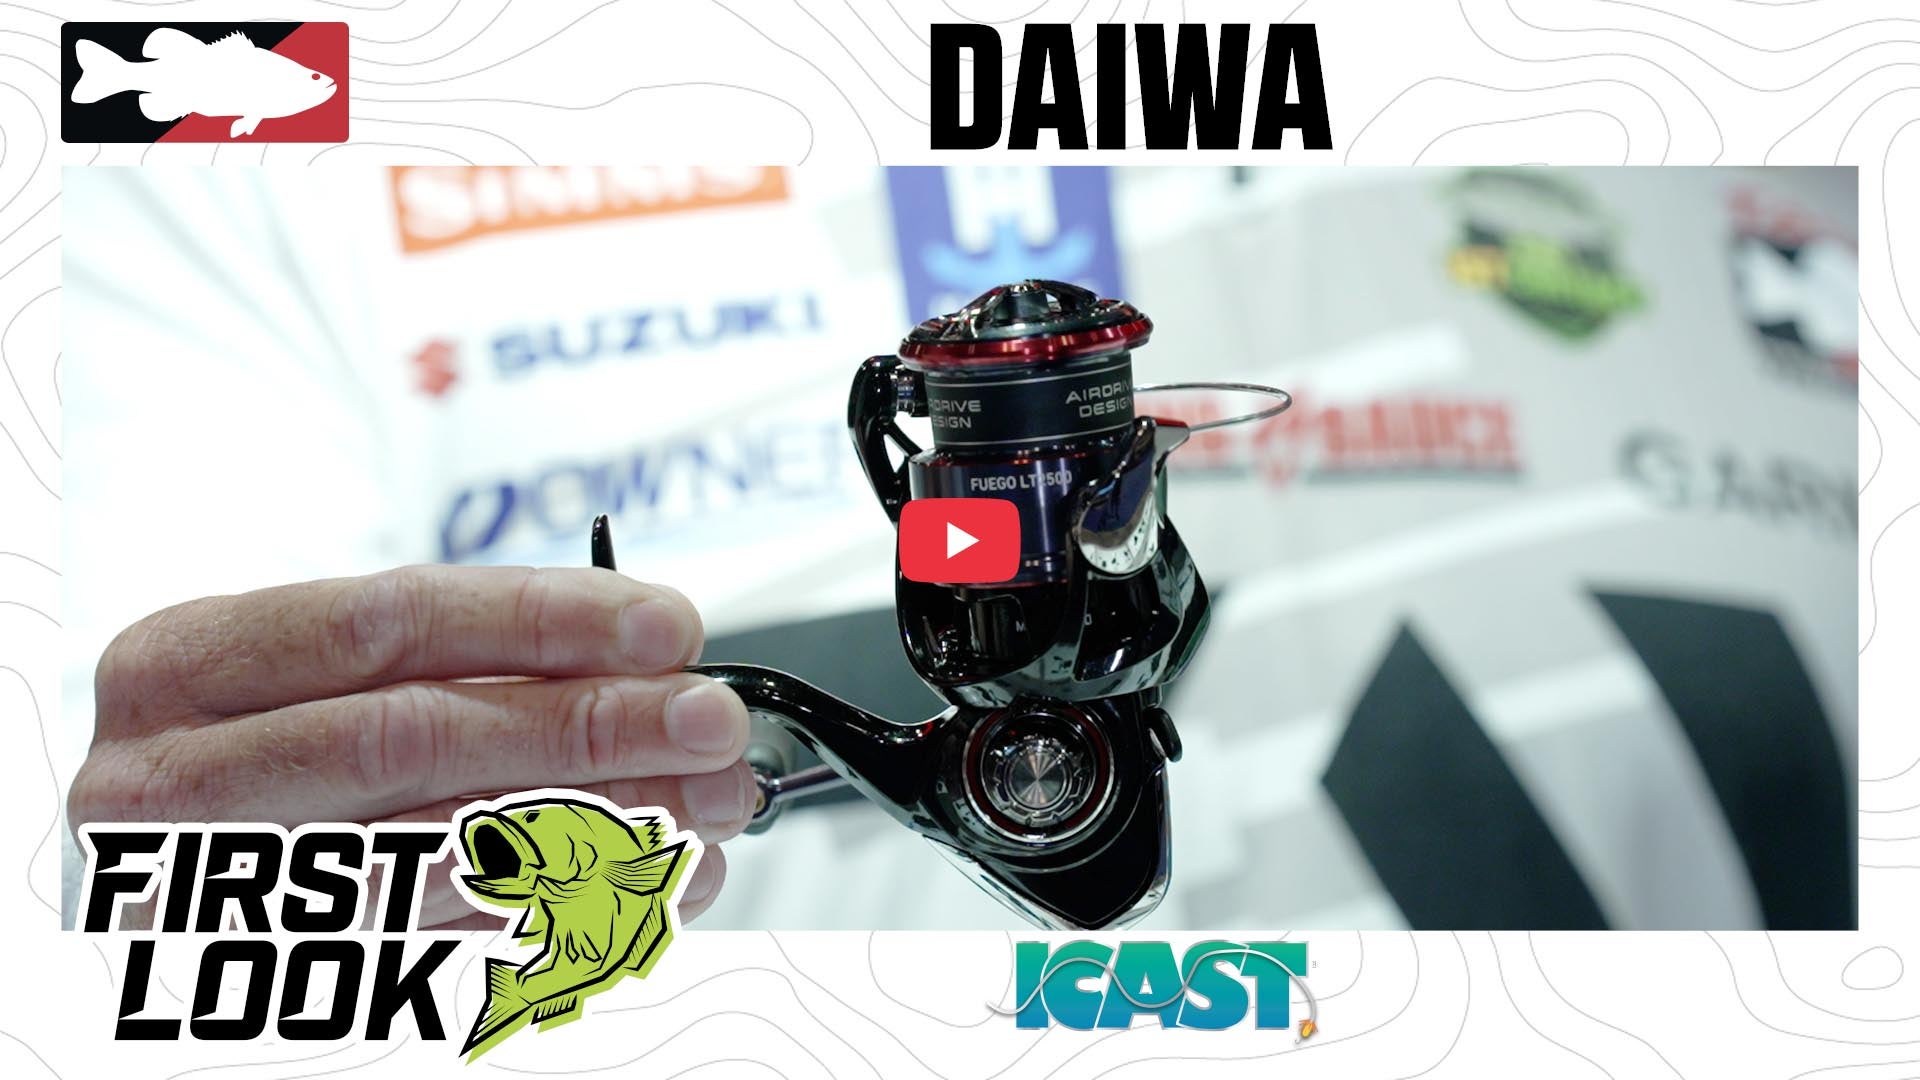 ICAST 2022 Videos - Daiwa Fuego LT Spinning Reels with Jared & Cody